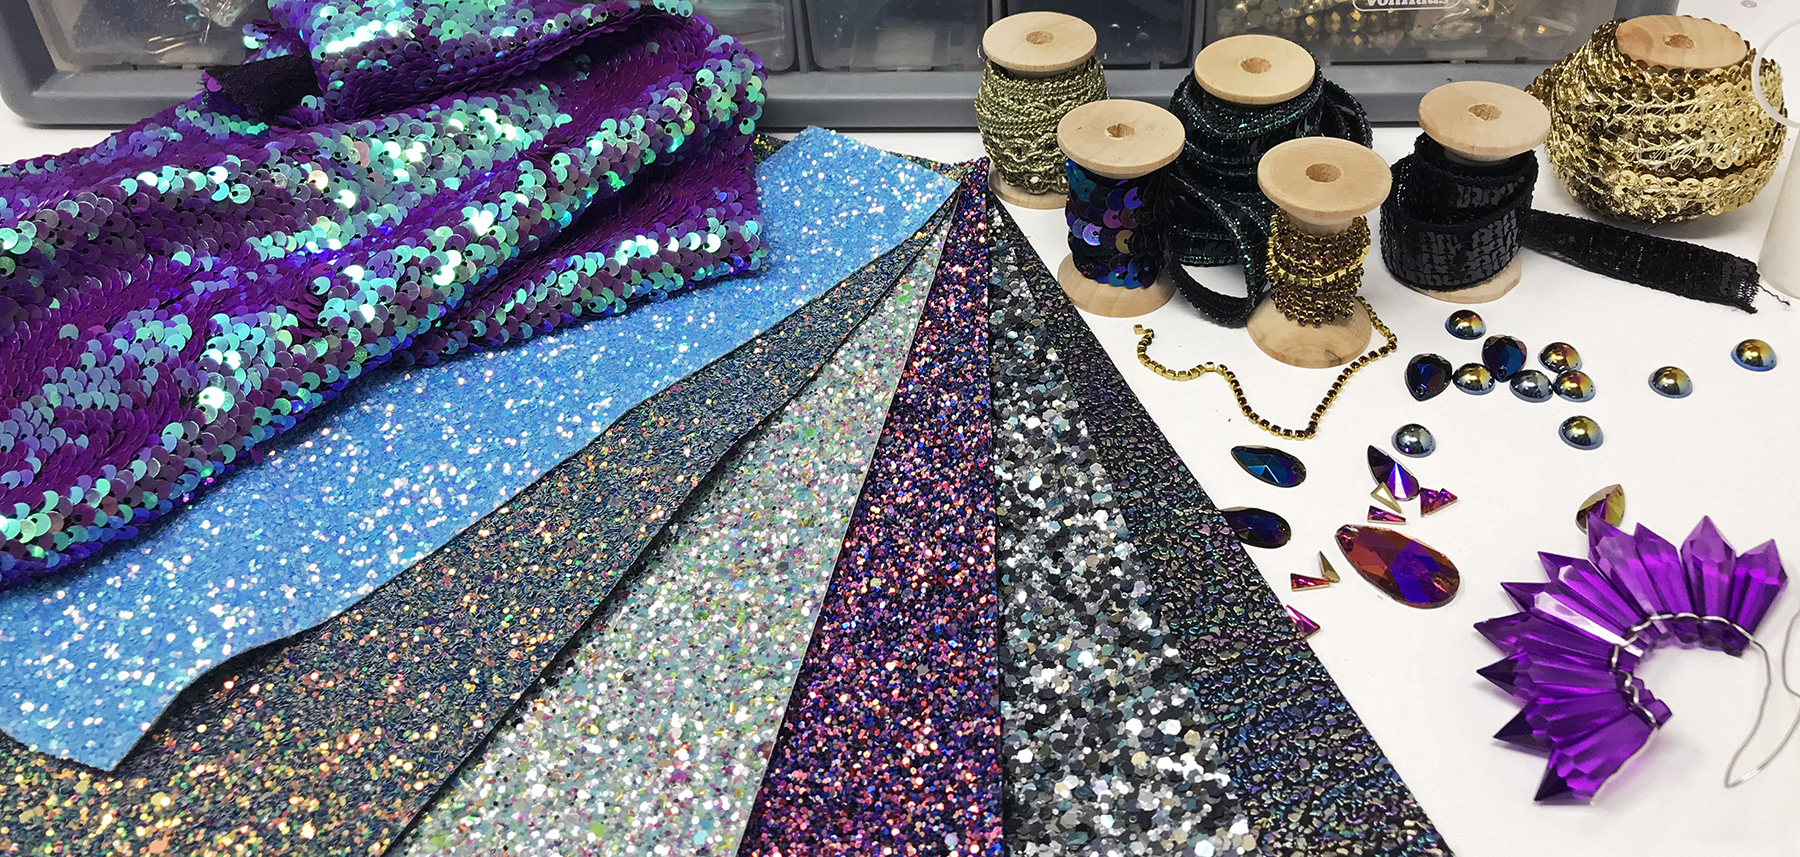 Glitter fabric, sequins, gemstones and crystals.